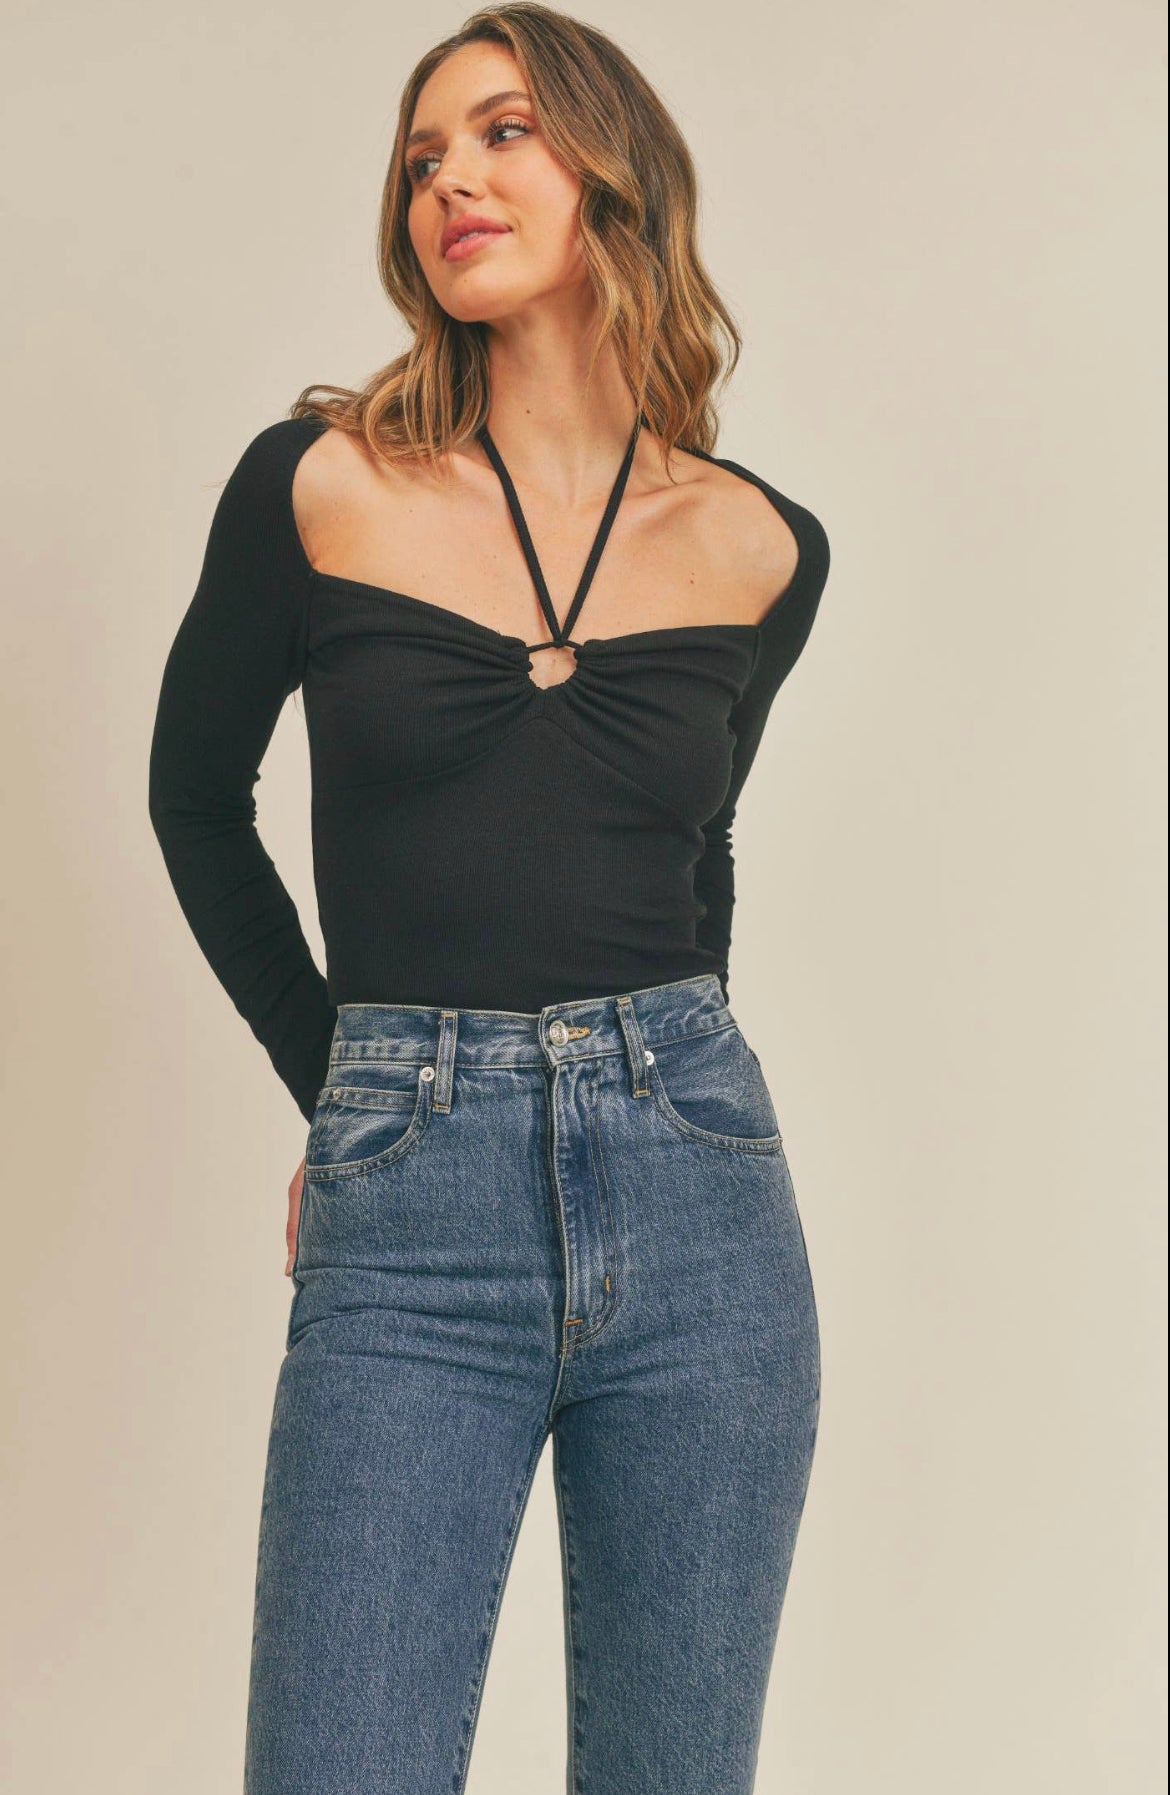 Play It Right Square Neck Halter Tie Top